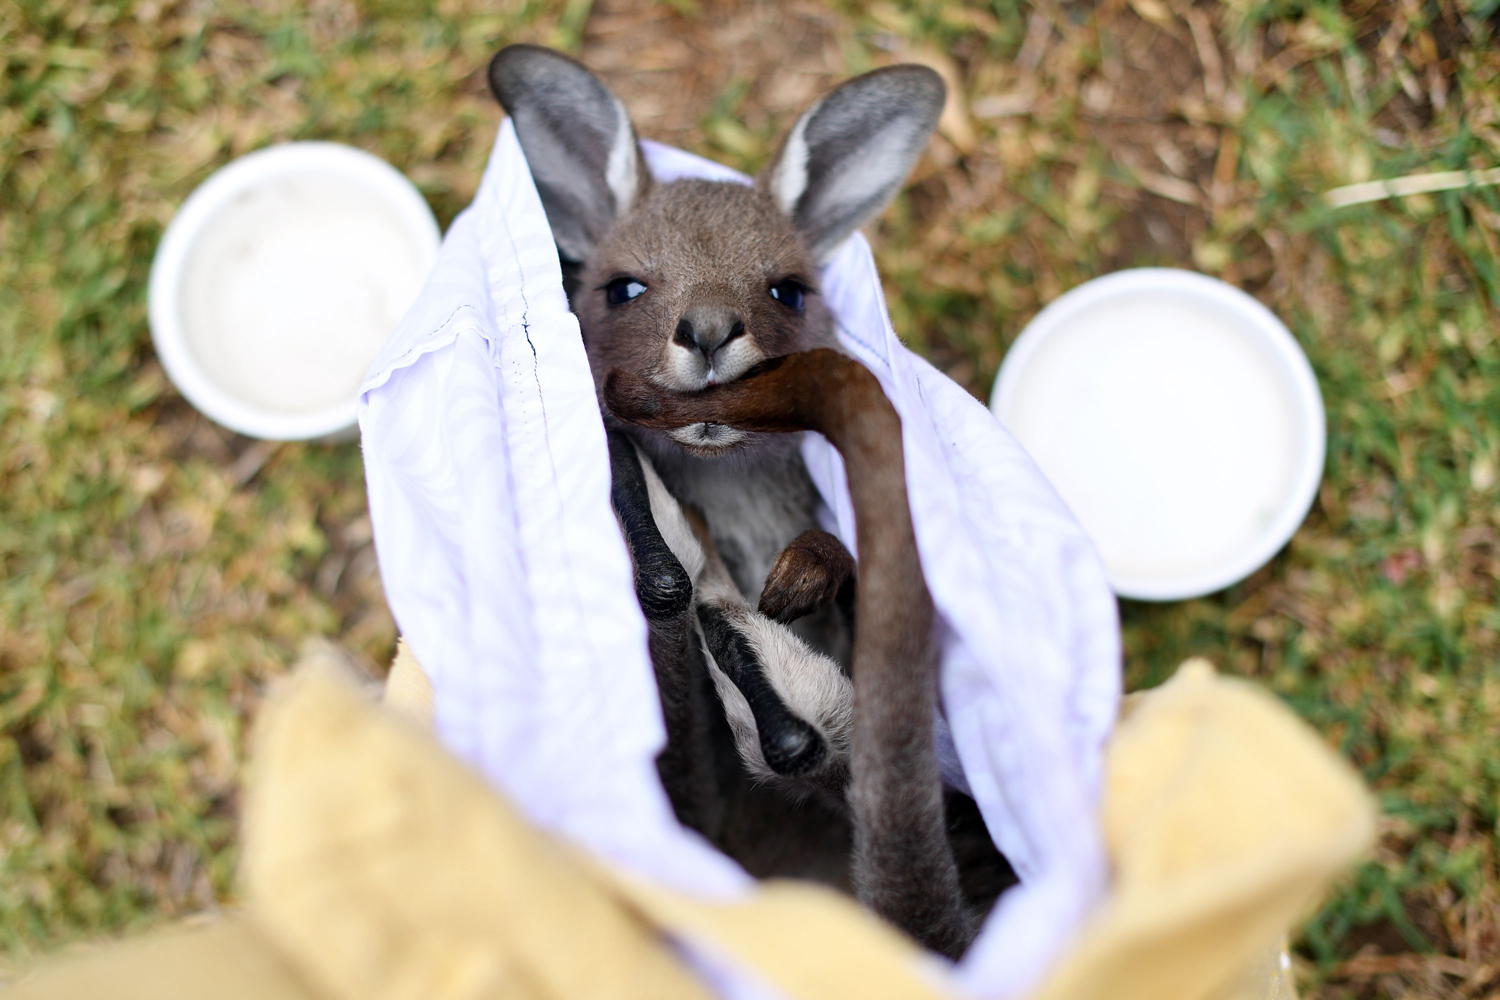 a rescued kangaroo being cared for by volunteers of wildlife rescue group WIRES